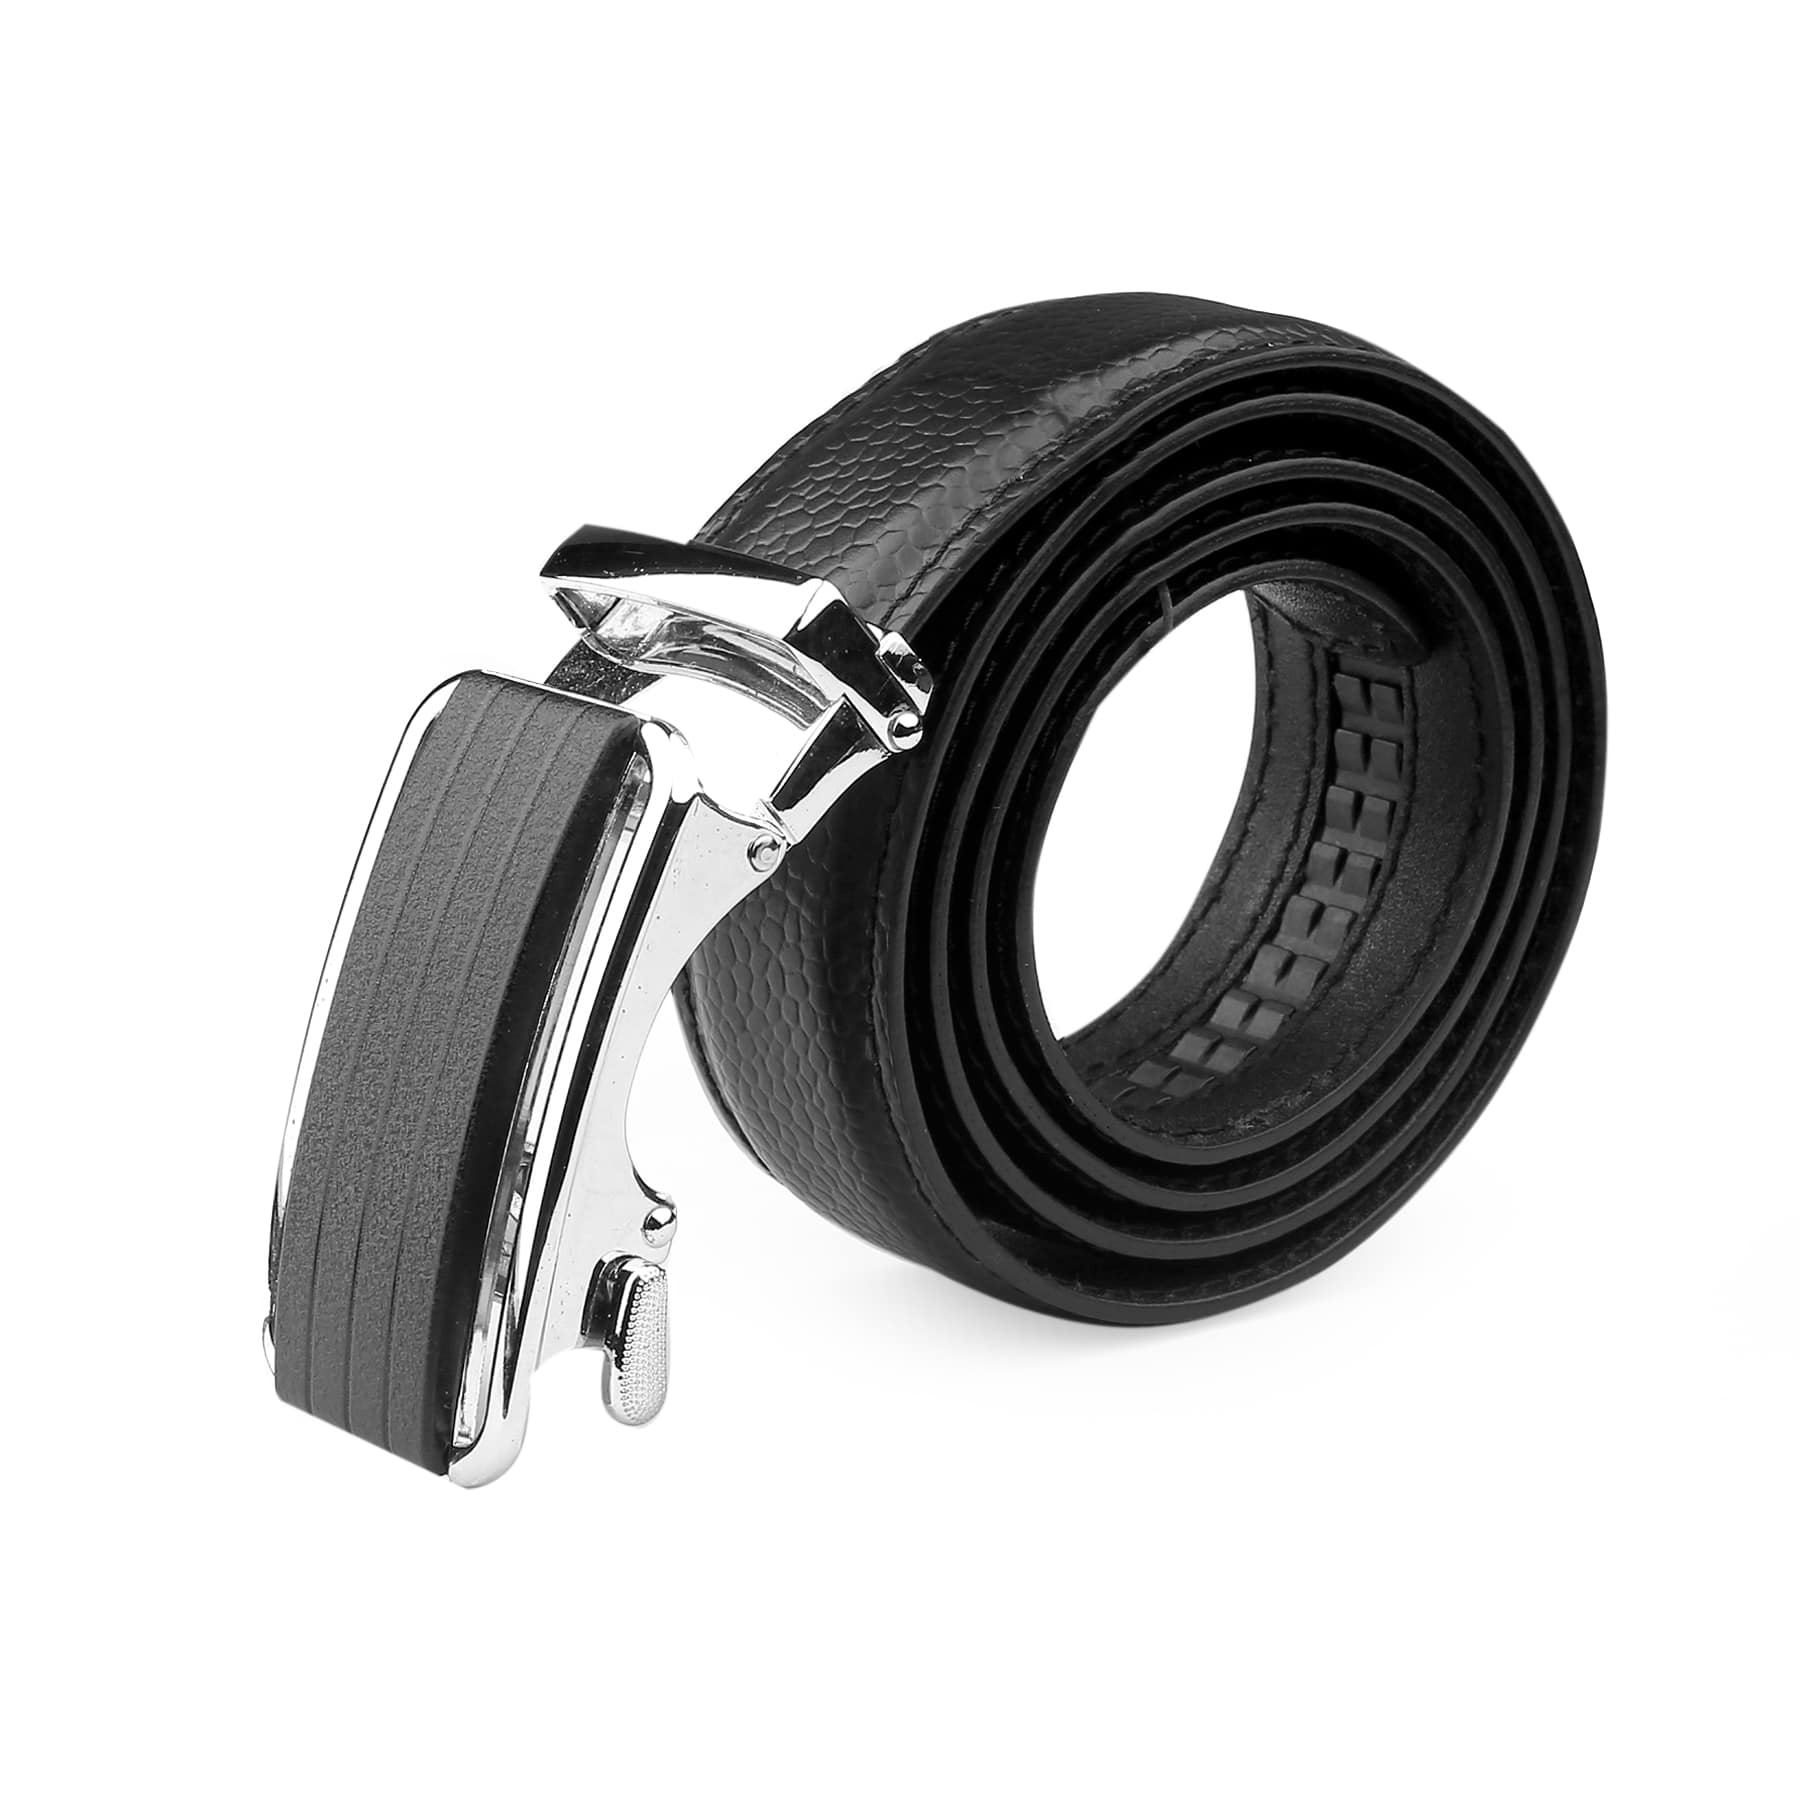 Bacca Bucci Premium Leather Formal Dress Belts with a Stylish Finish and a Auto Lock Nickel-Free Buckle